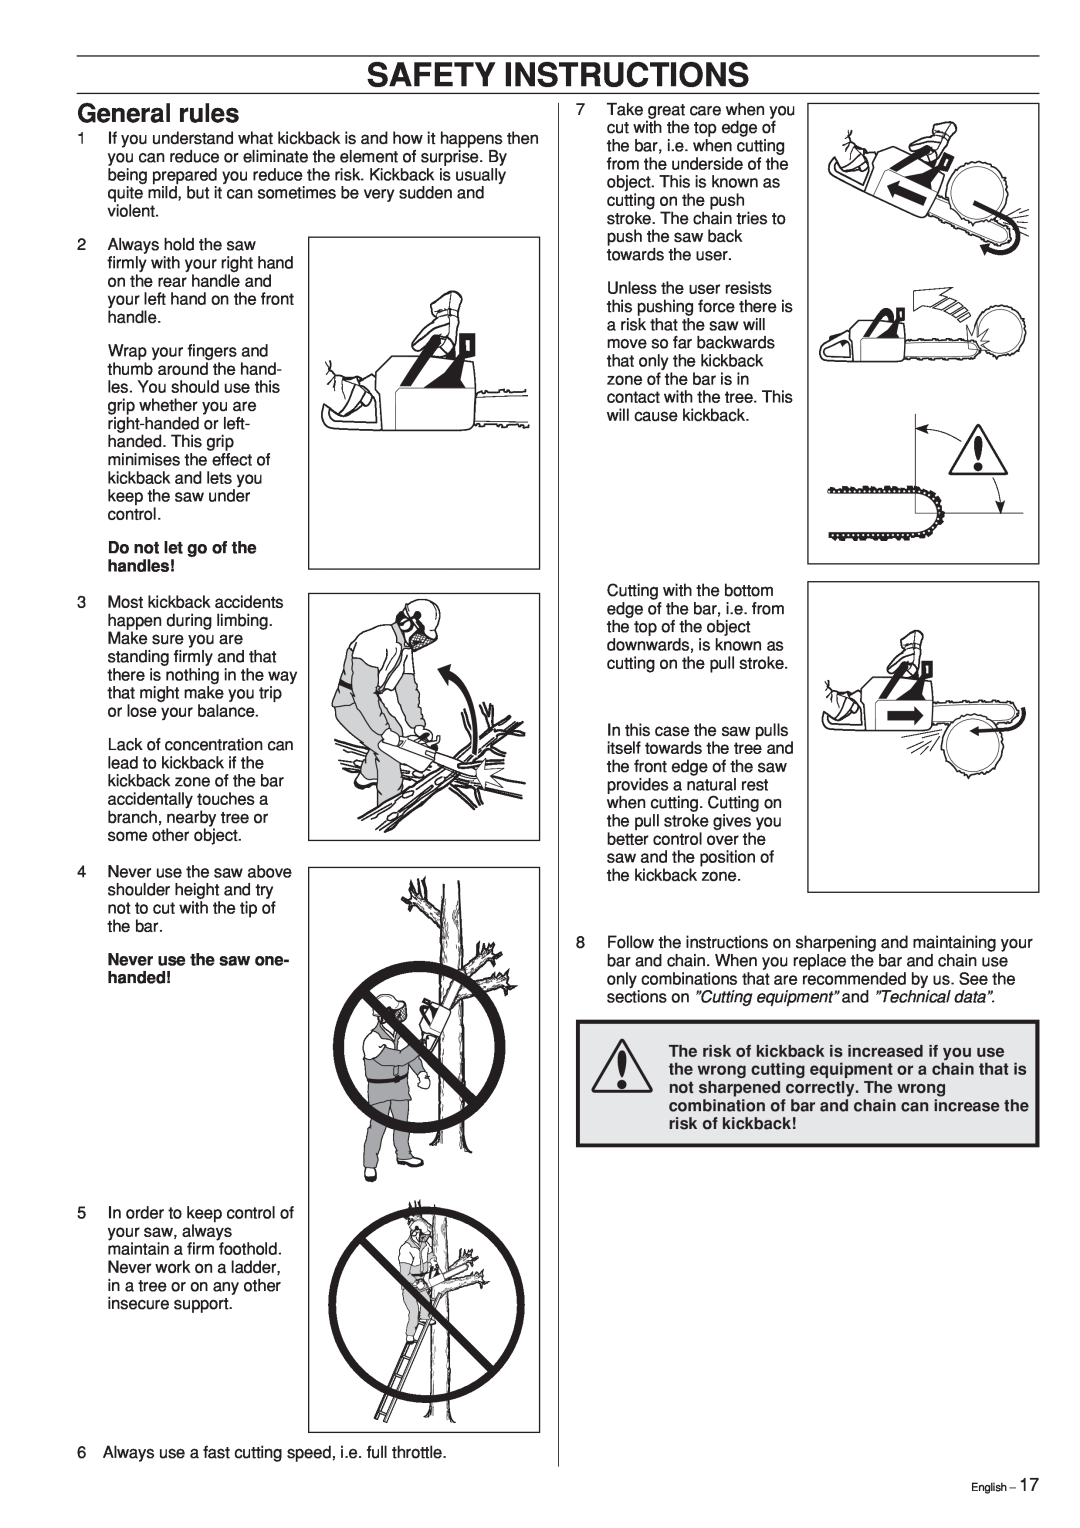 Jonsered cs 2159 manual General rules, Do not let go of the handles, Never use the saw one- handed, Safety Instructions 